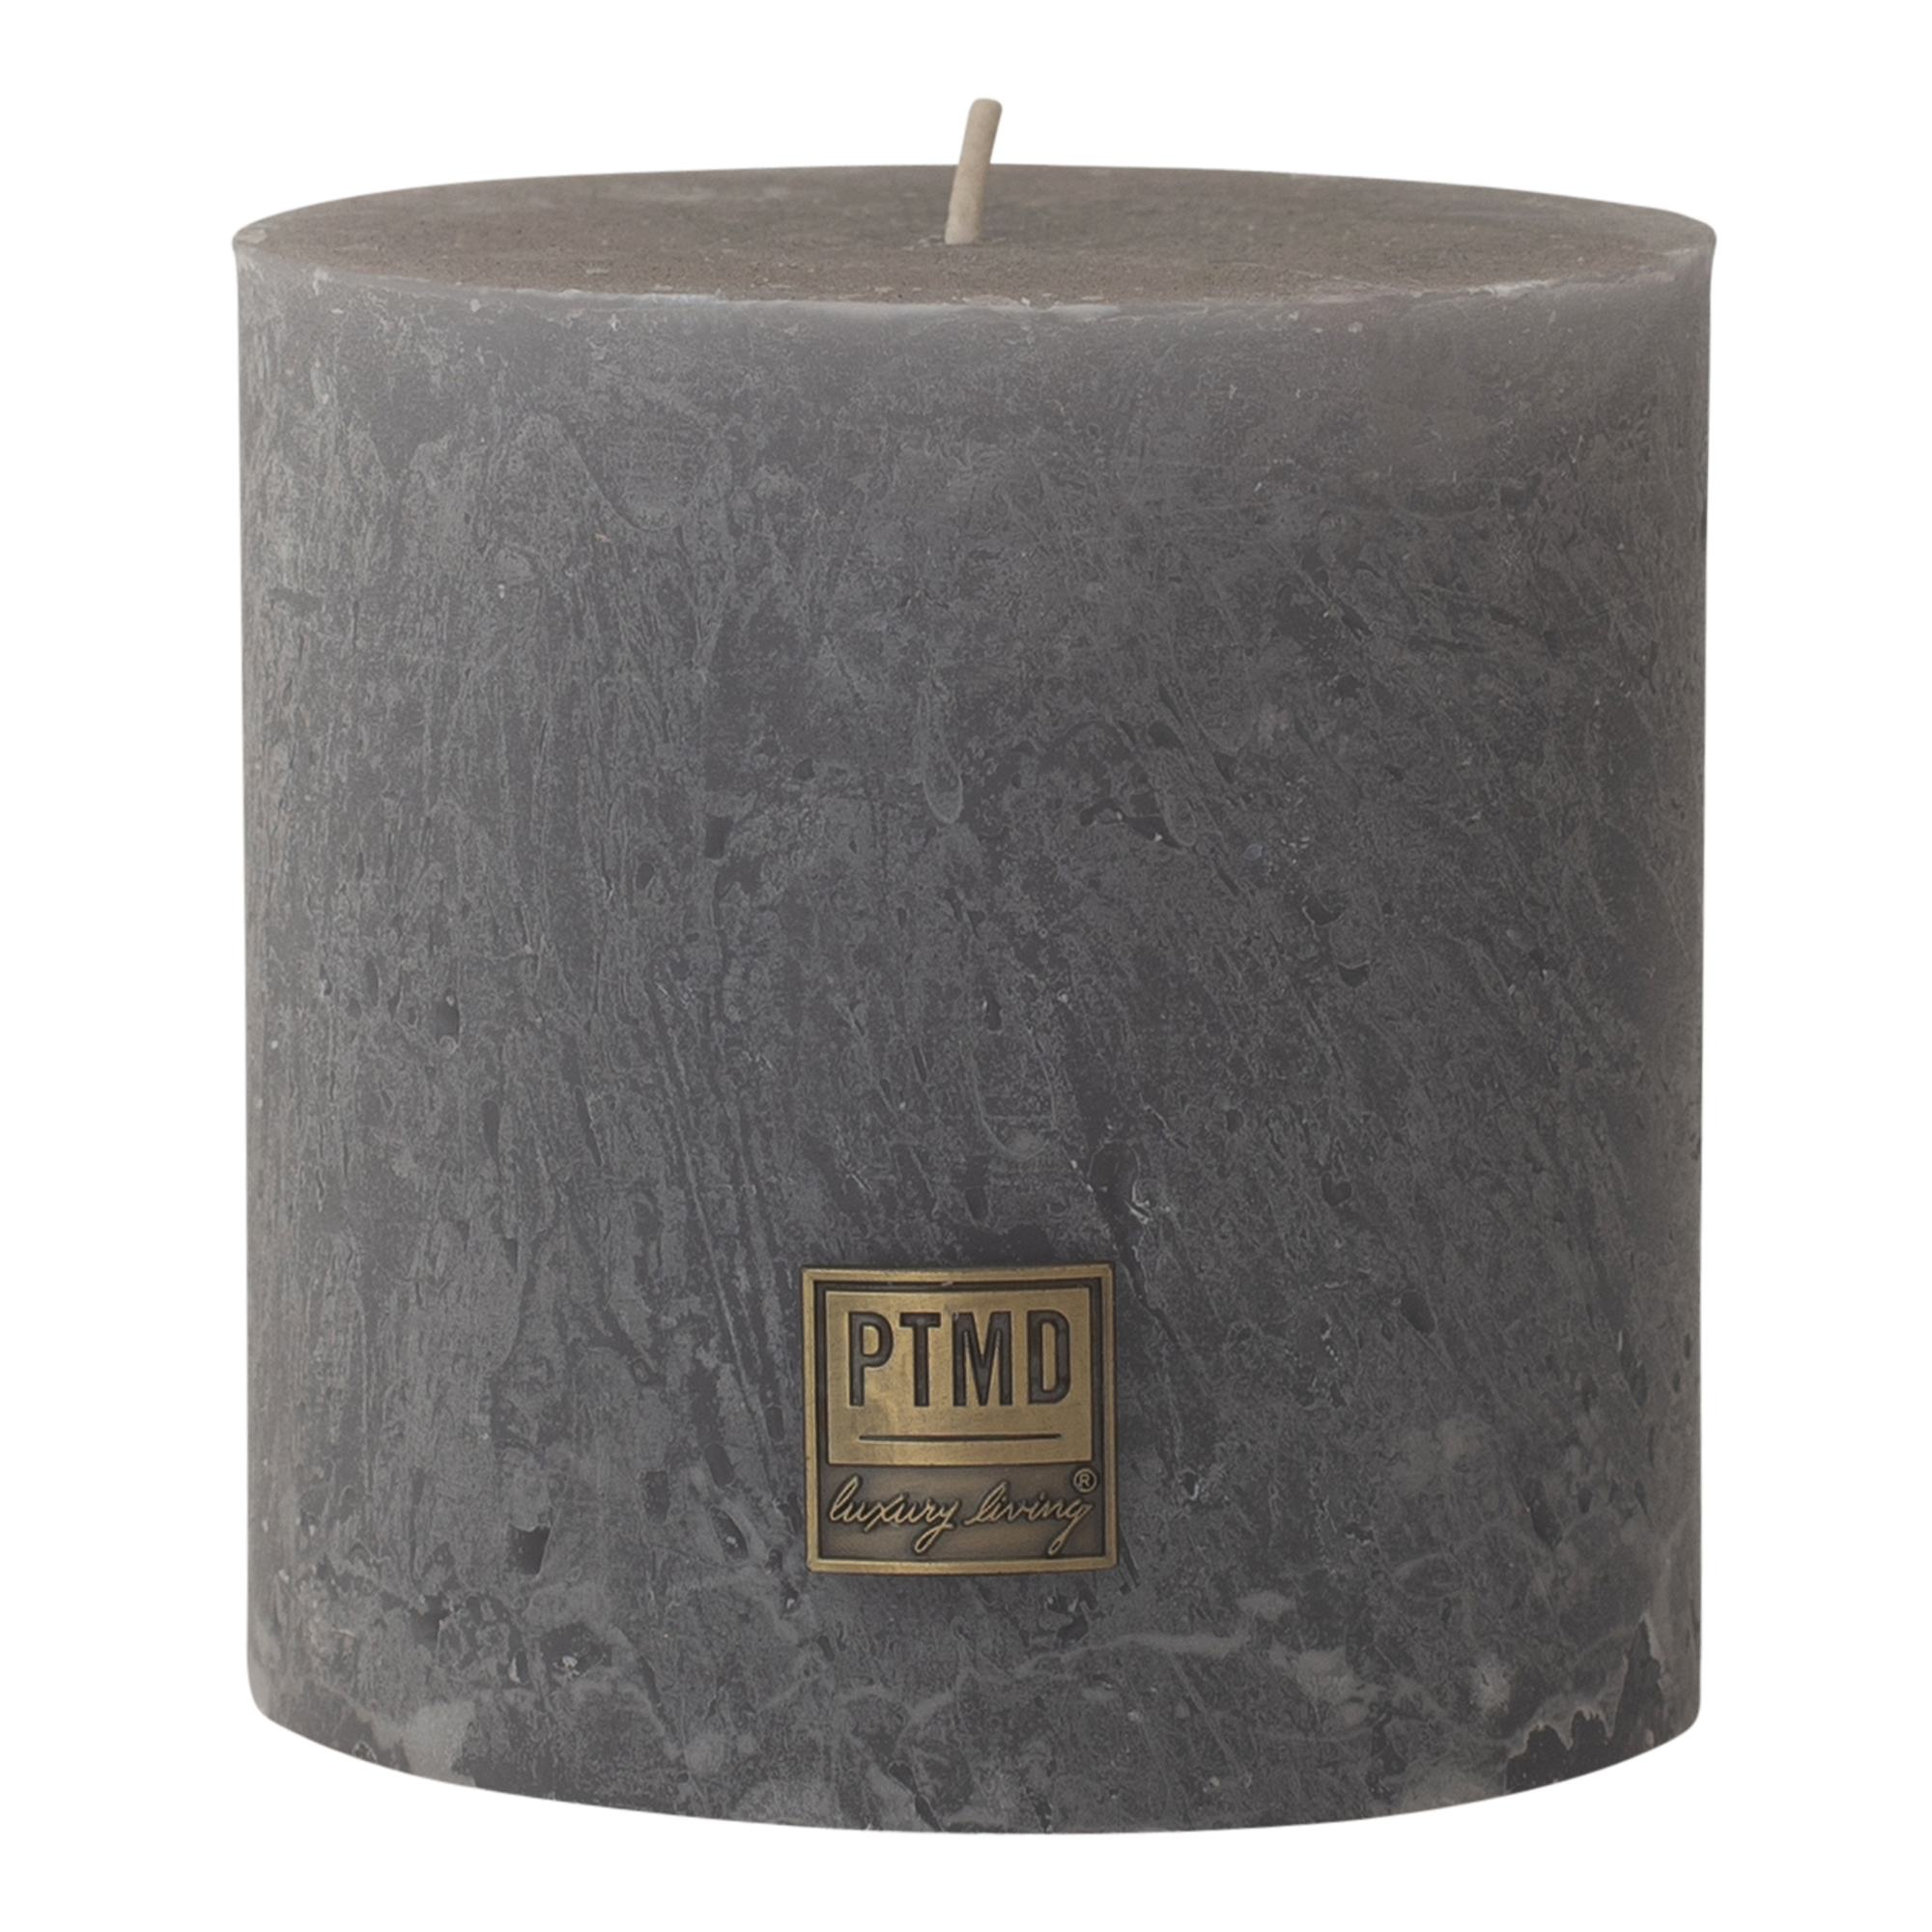 PTMD 10 x 10cm Suede Grey Rustic Block Candle